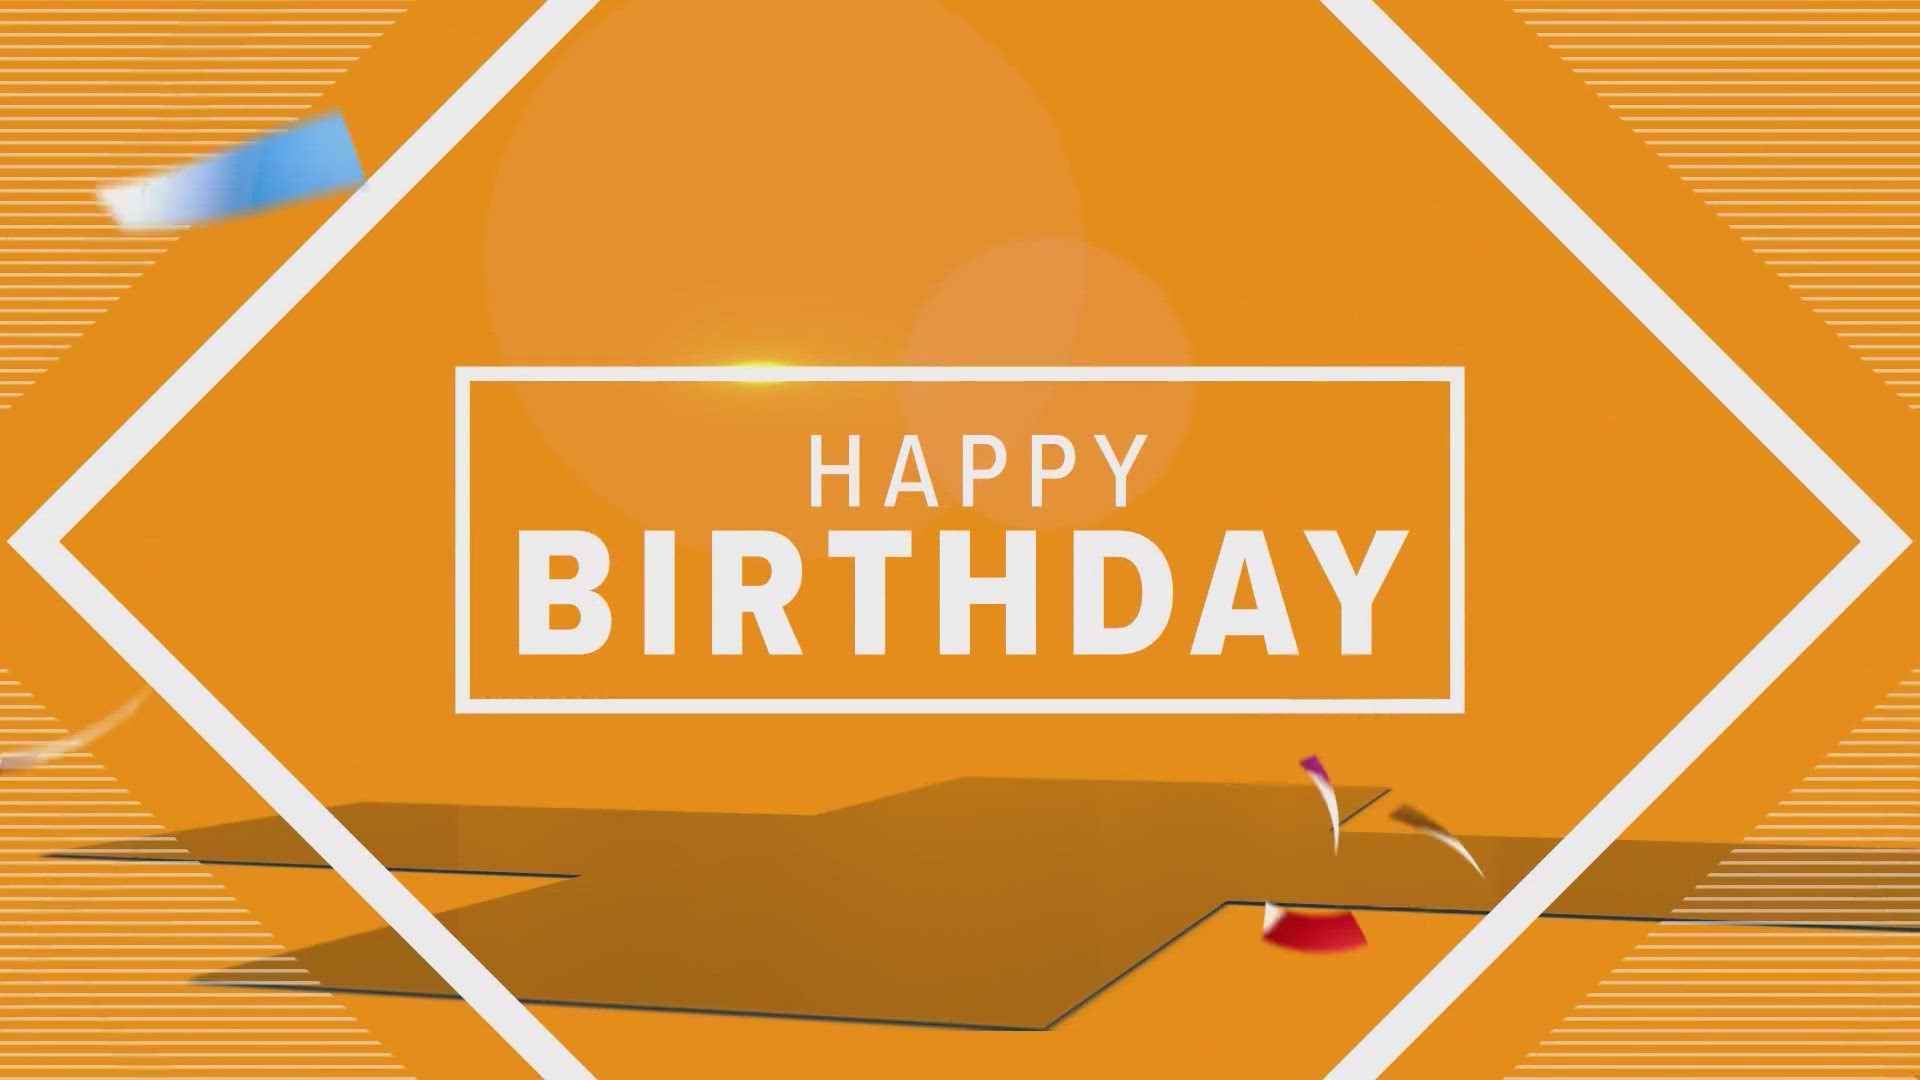 Texas Today wishes everyone born on October 9, a very happy birthday!